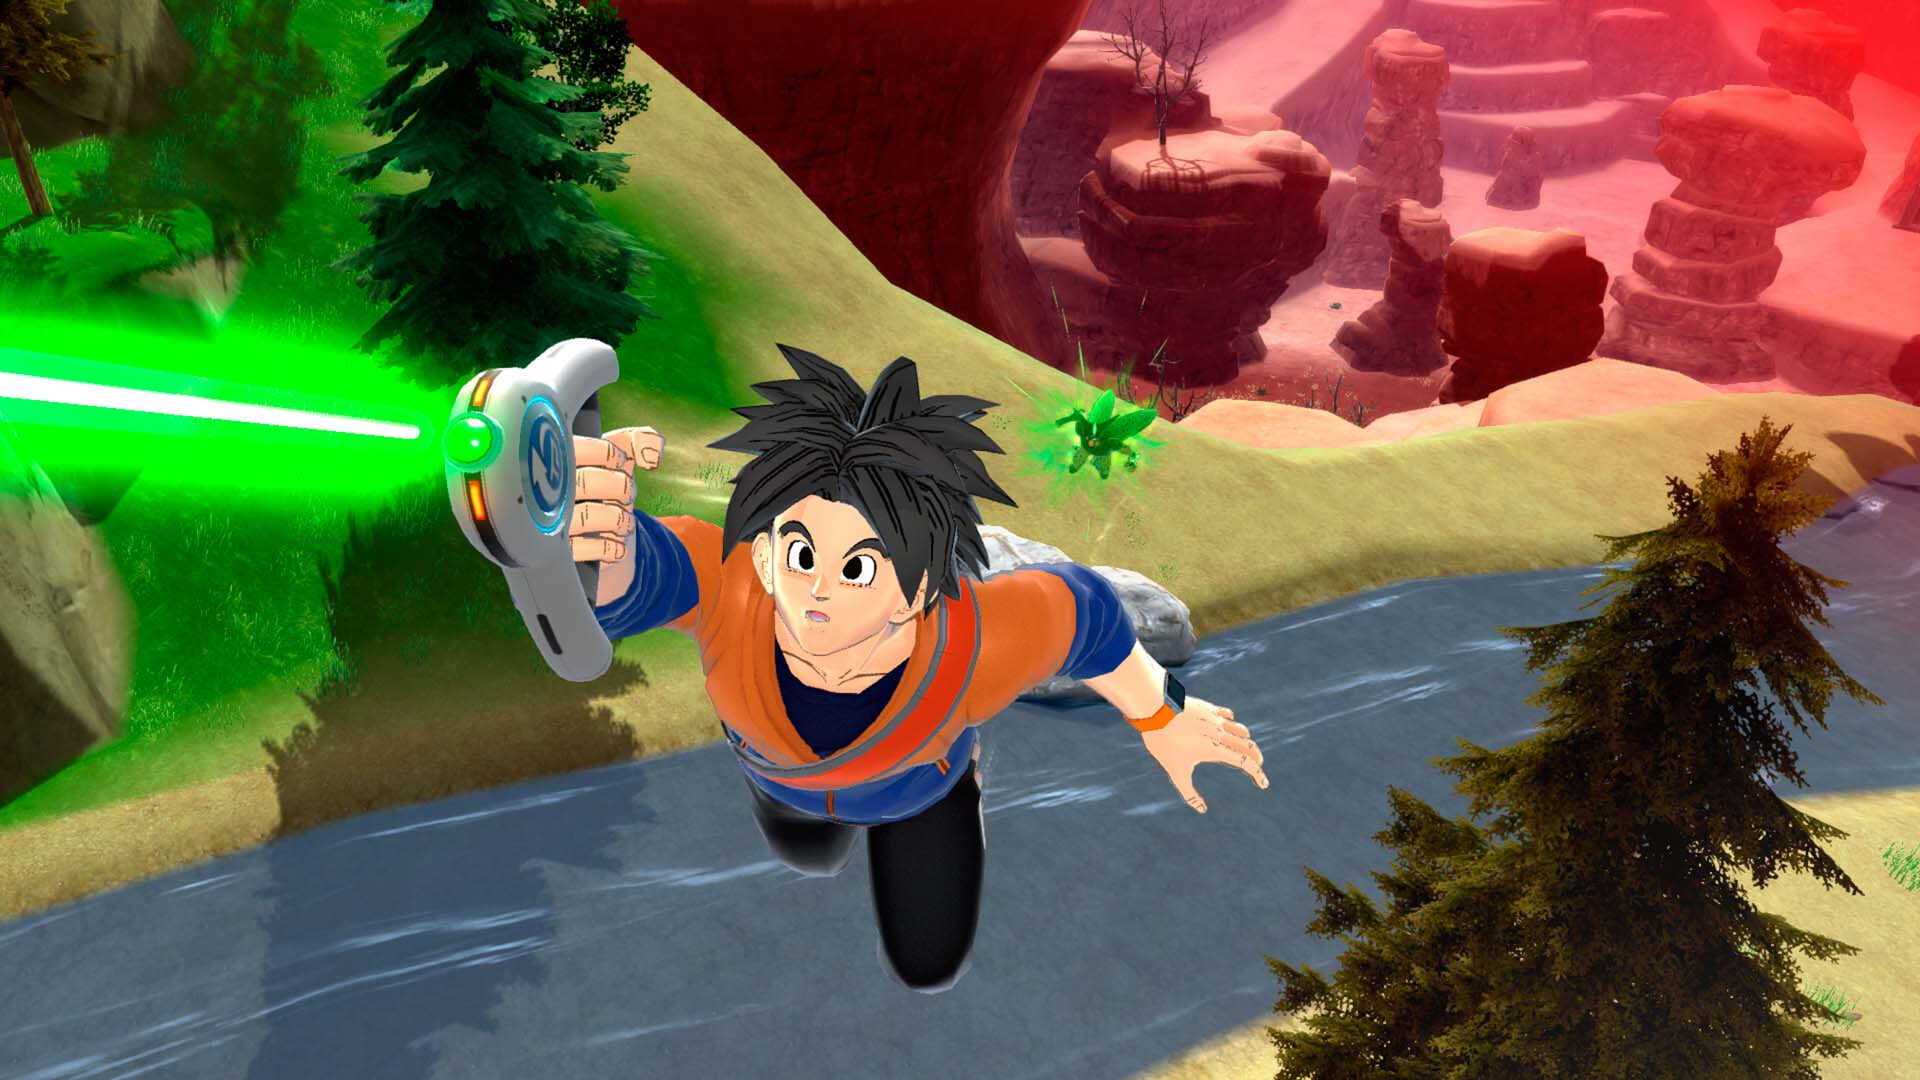 DRAGON BALL: THE BREAKERS, PC Steam Game